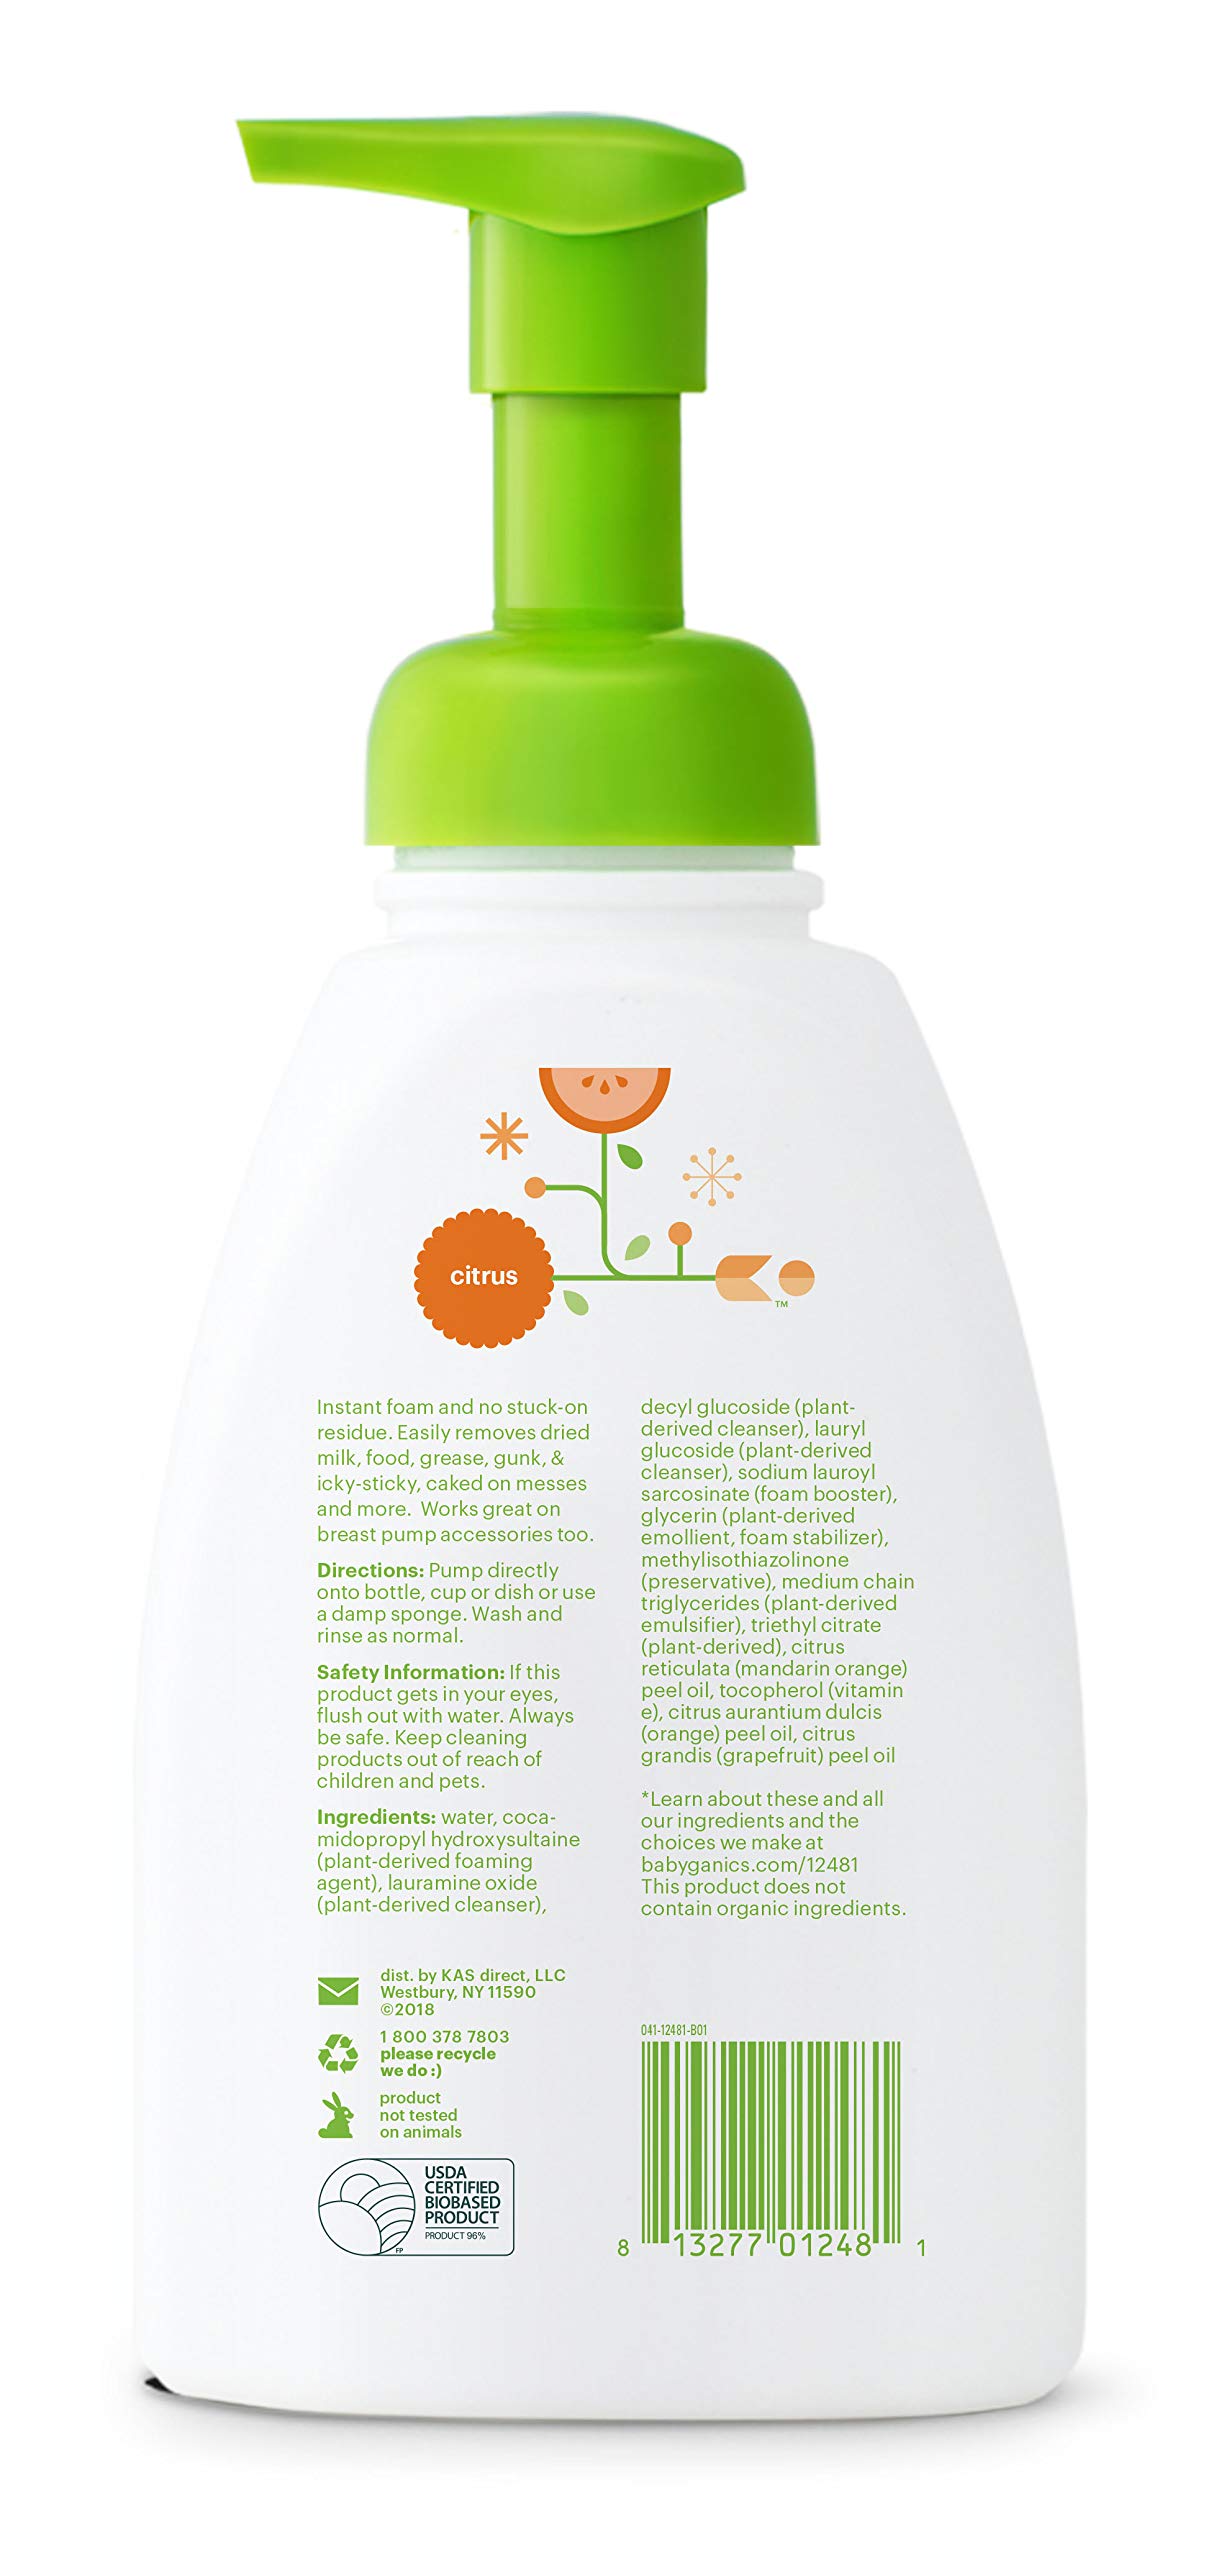 Babyganics Foaming Dish & Bottle Soap, Pump Bottle, Citrus, Plant-Derived Cleaning Power, Removes Dried Milk, 16 Fl Oz (Pack of 3), Packaging May Vary